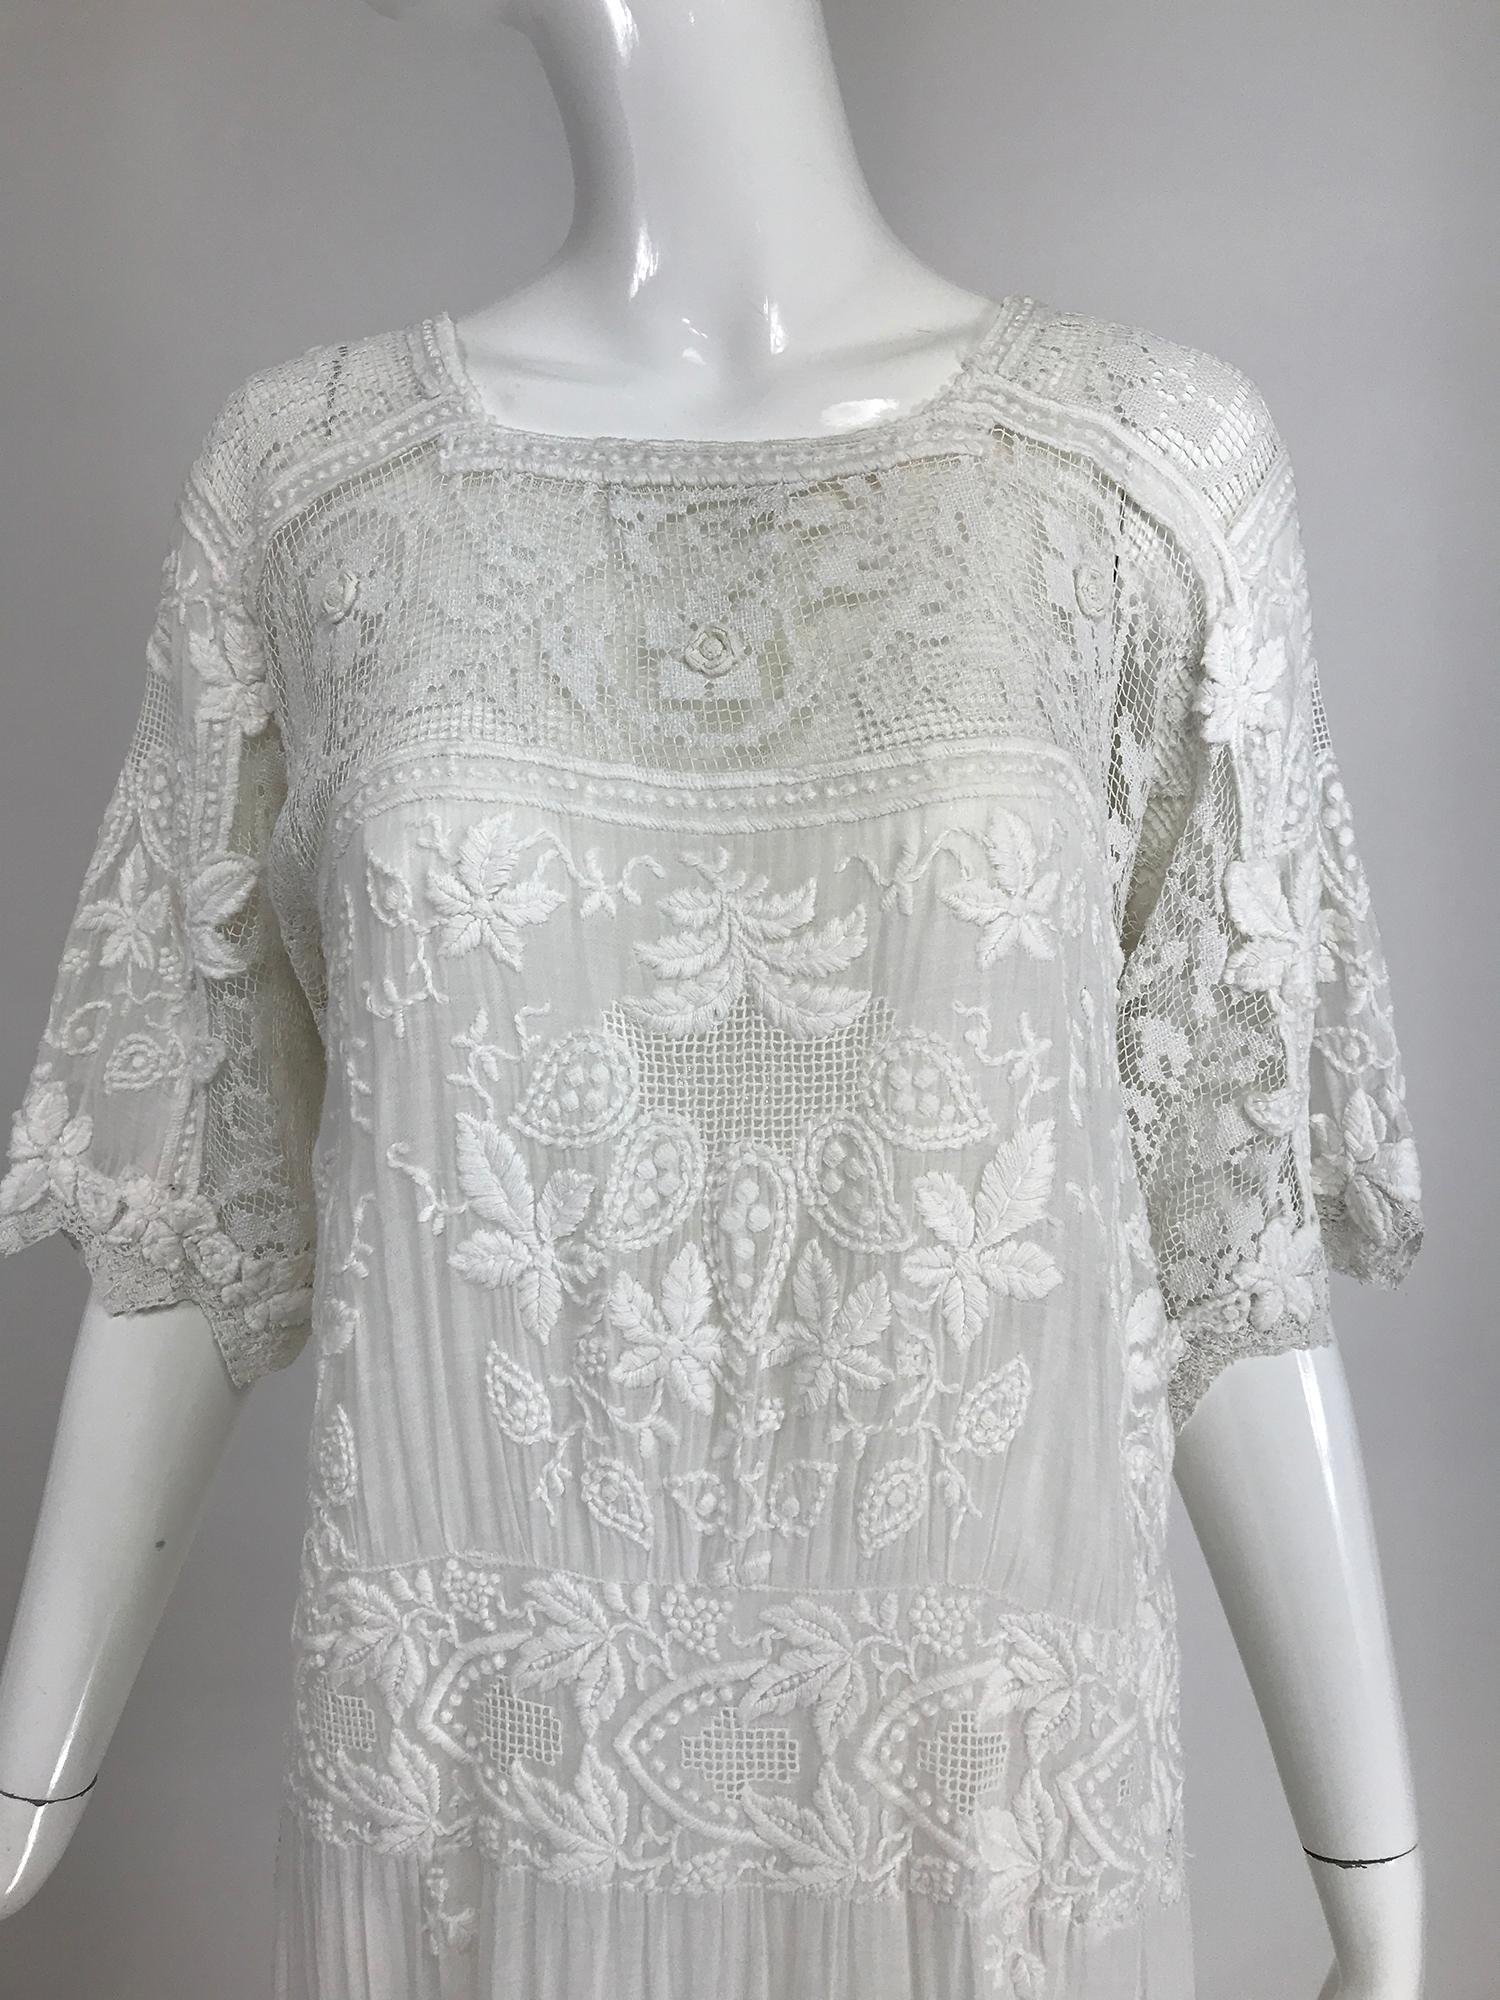 
Edwardian handmade embroidered & appliqued, white batiste and filet lace dress. Heavily embroidered fine cotton batiste tea dress from the early 1900s in a style that is very wearable today. A combination of batiste, a fine translucent cotton,